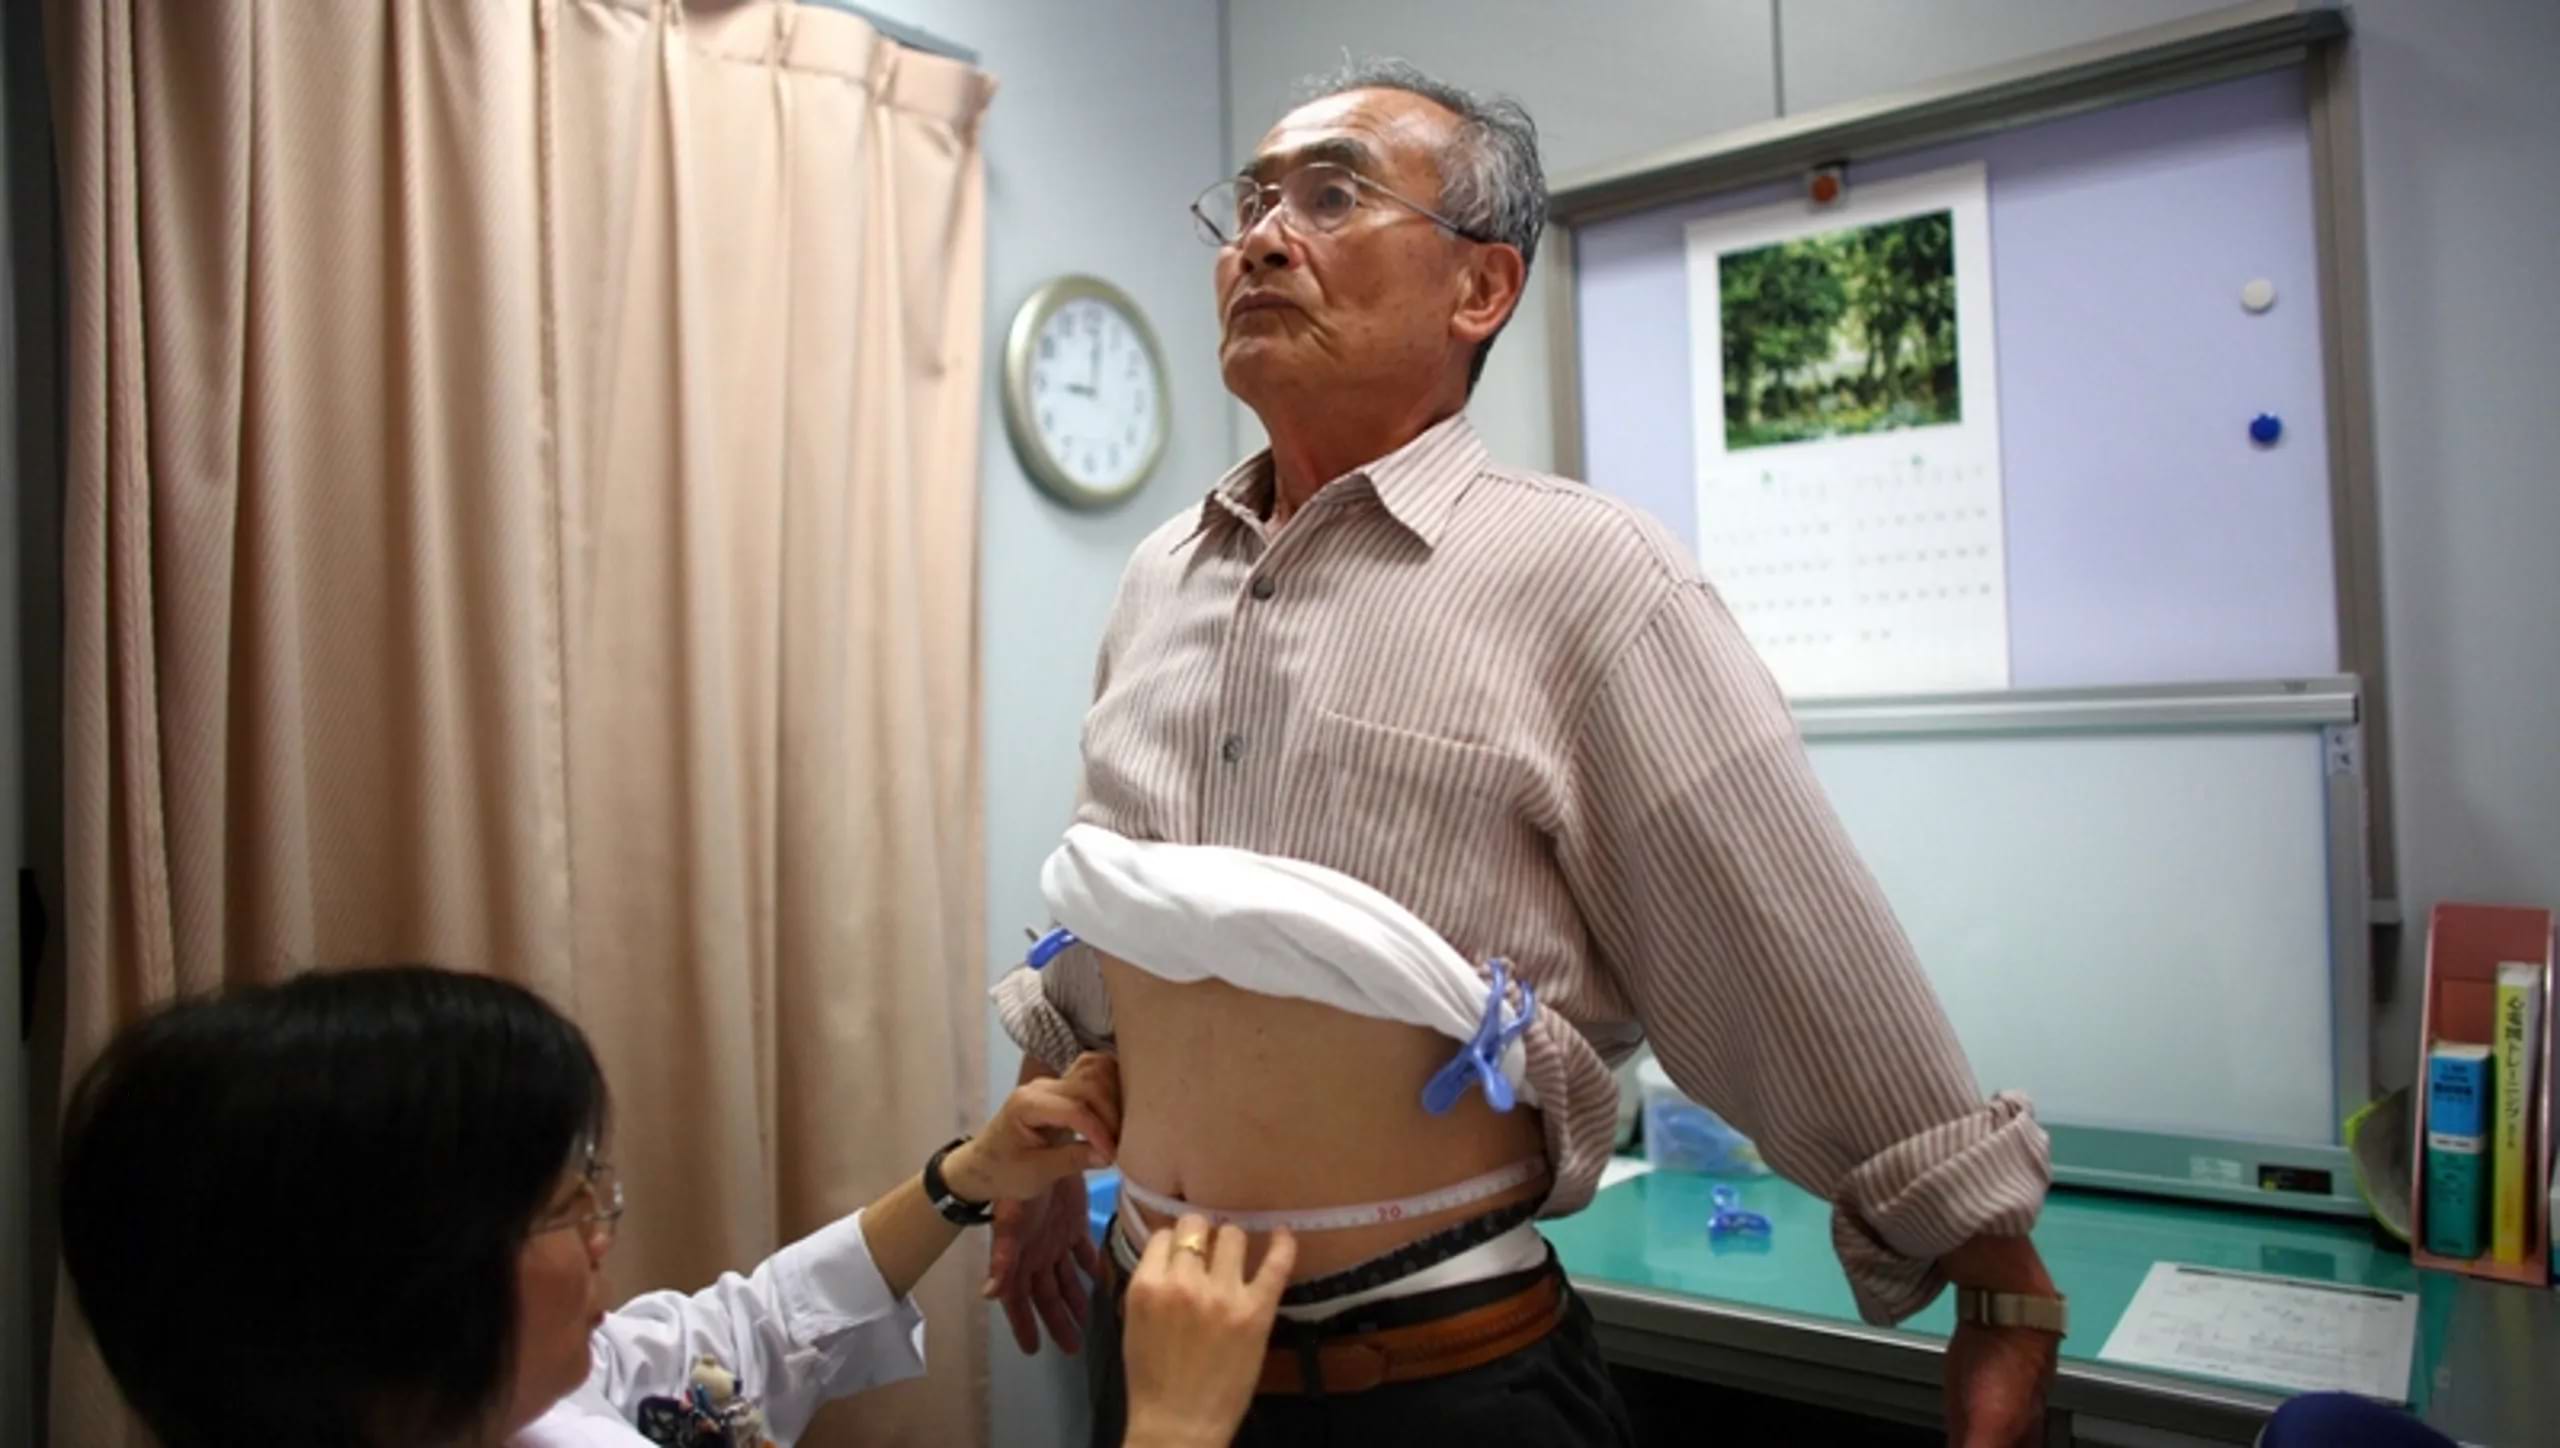 a man having his waist measured at the doctors